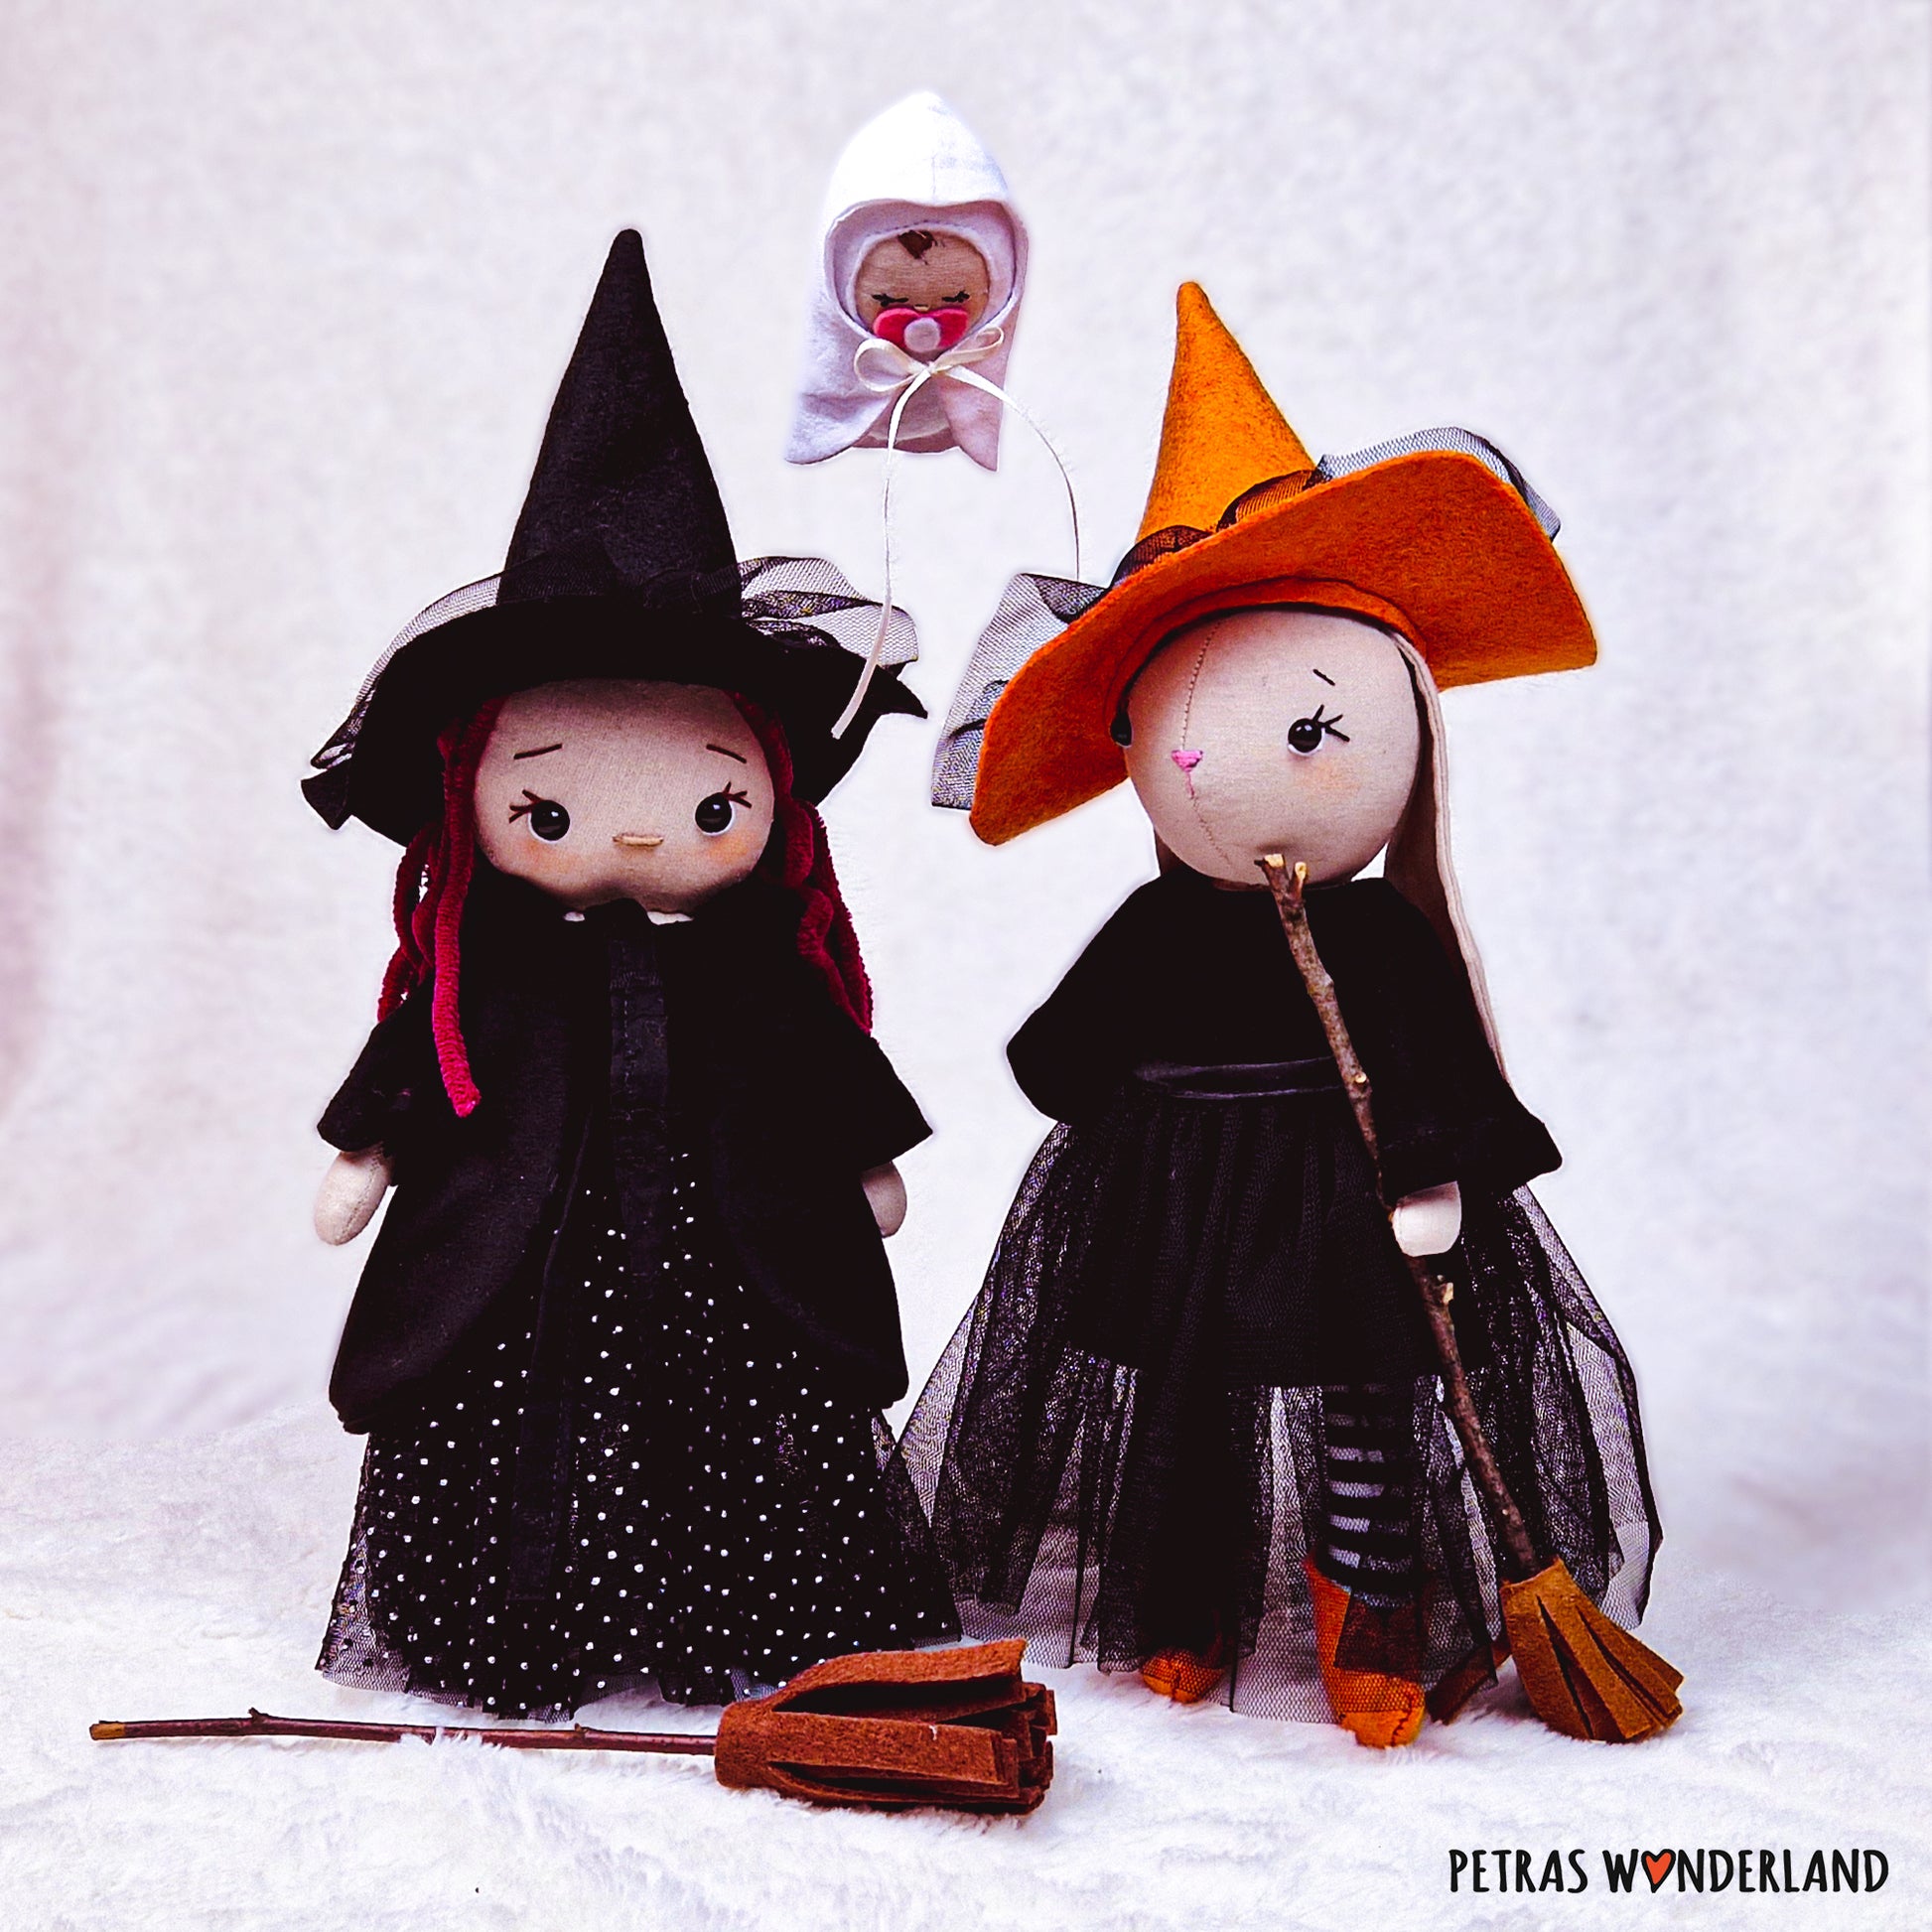 Witch clothes and accessories - sewing patterns and tutorials